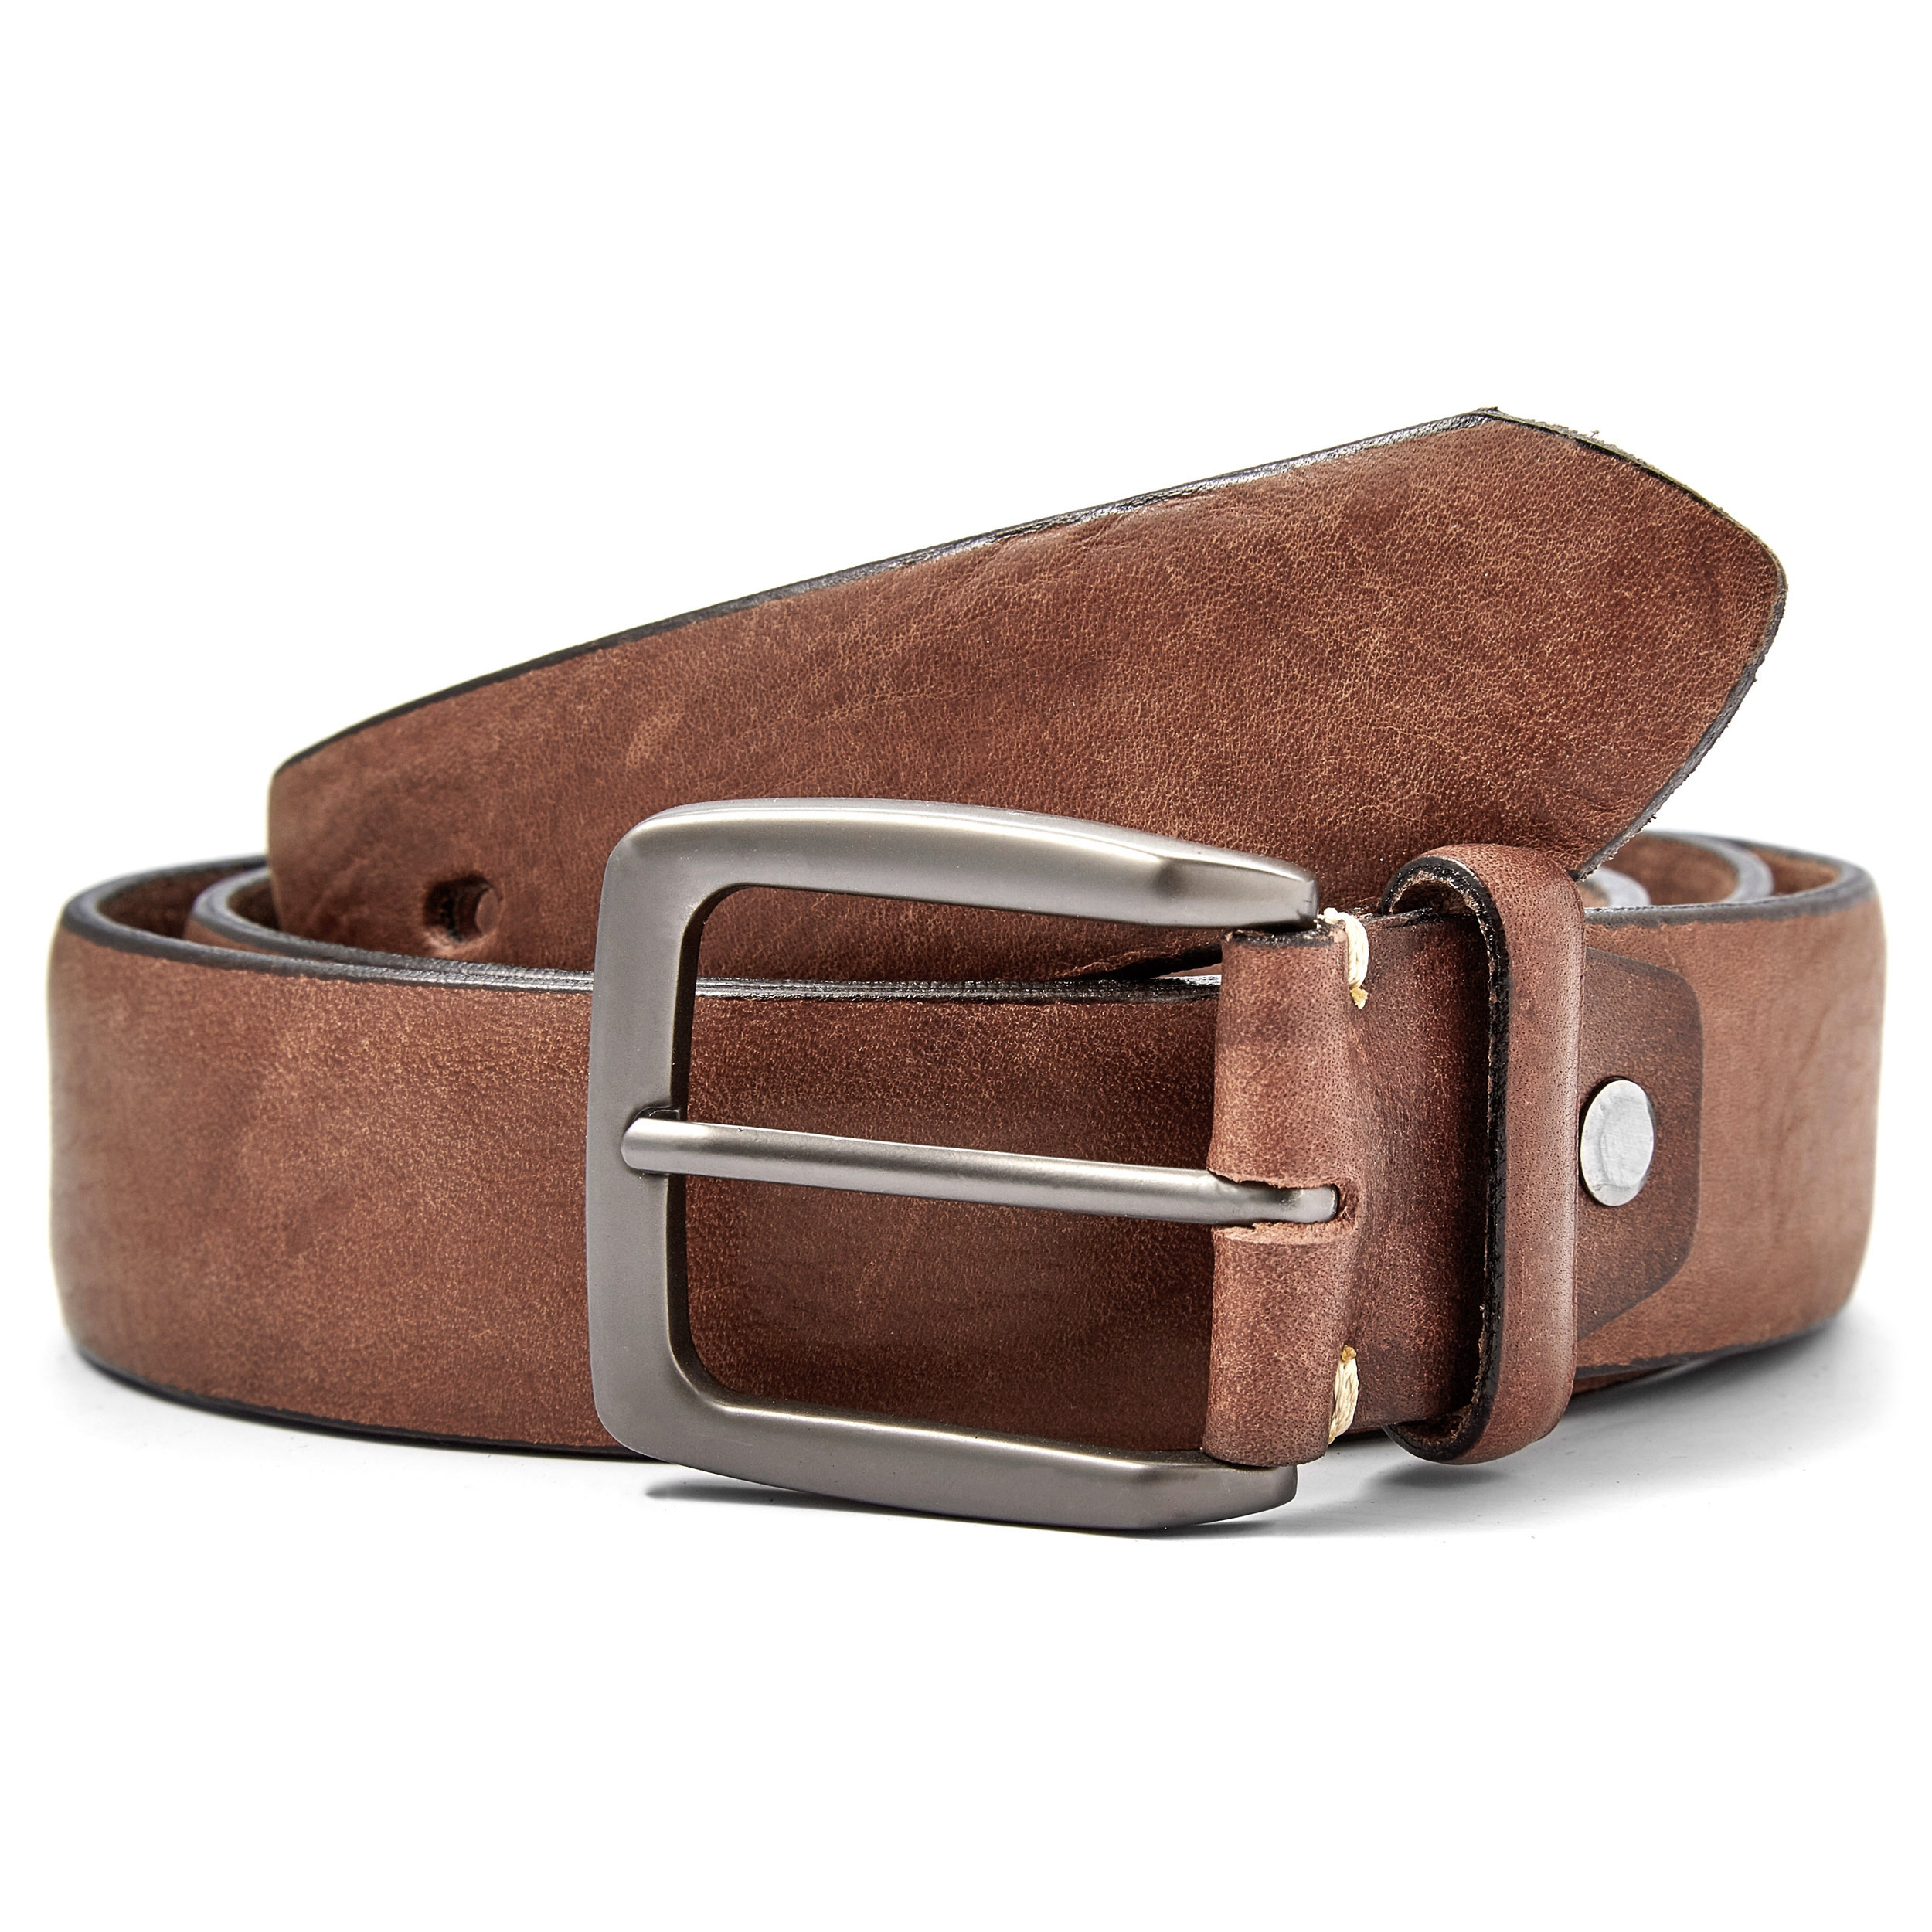 Light Brown Leather Belt | BSWK | Free shipping